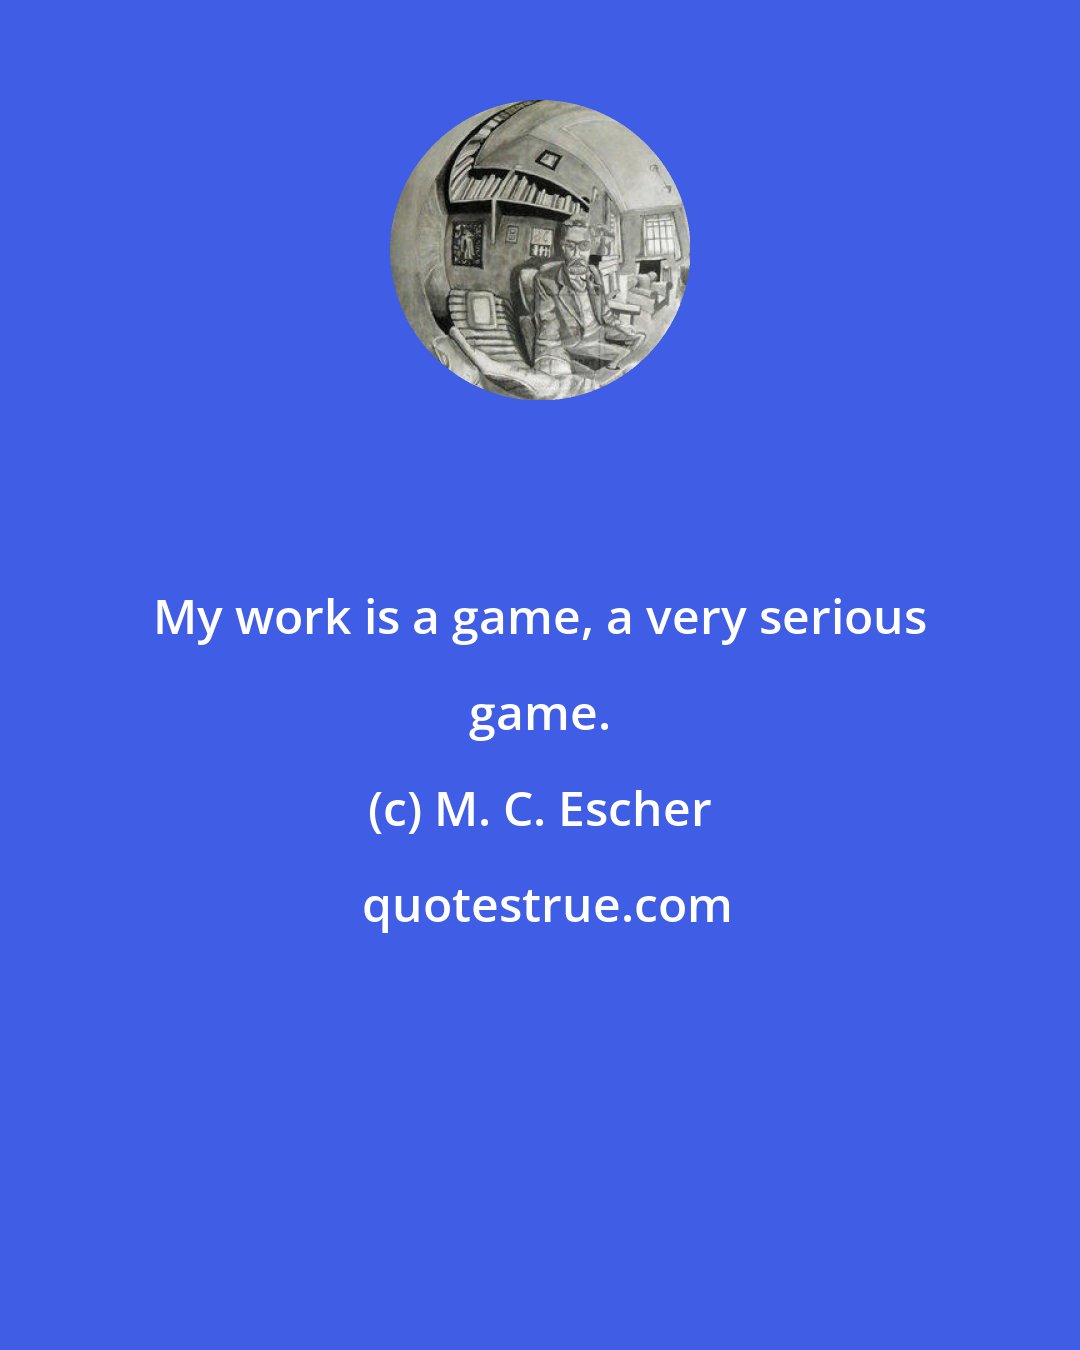 M. C. Escher: My work is a game, a very serious game.